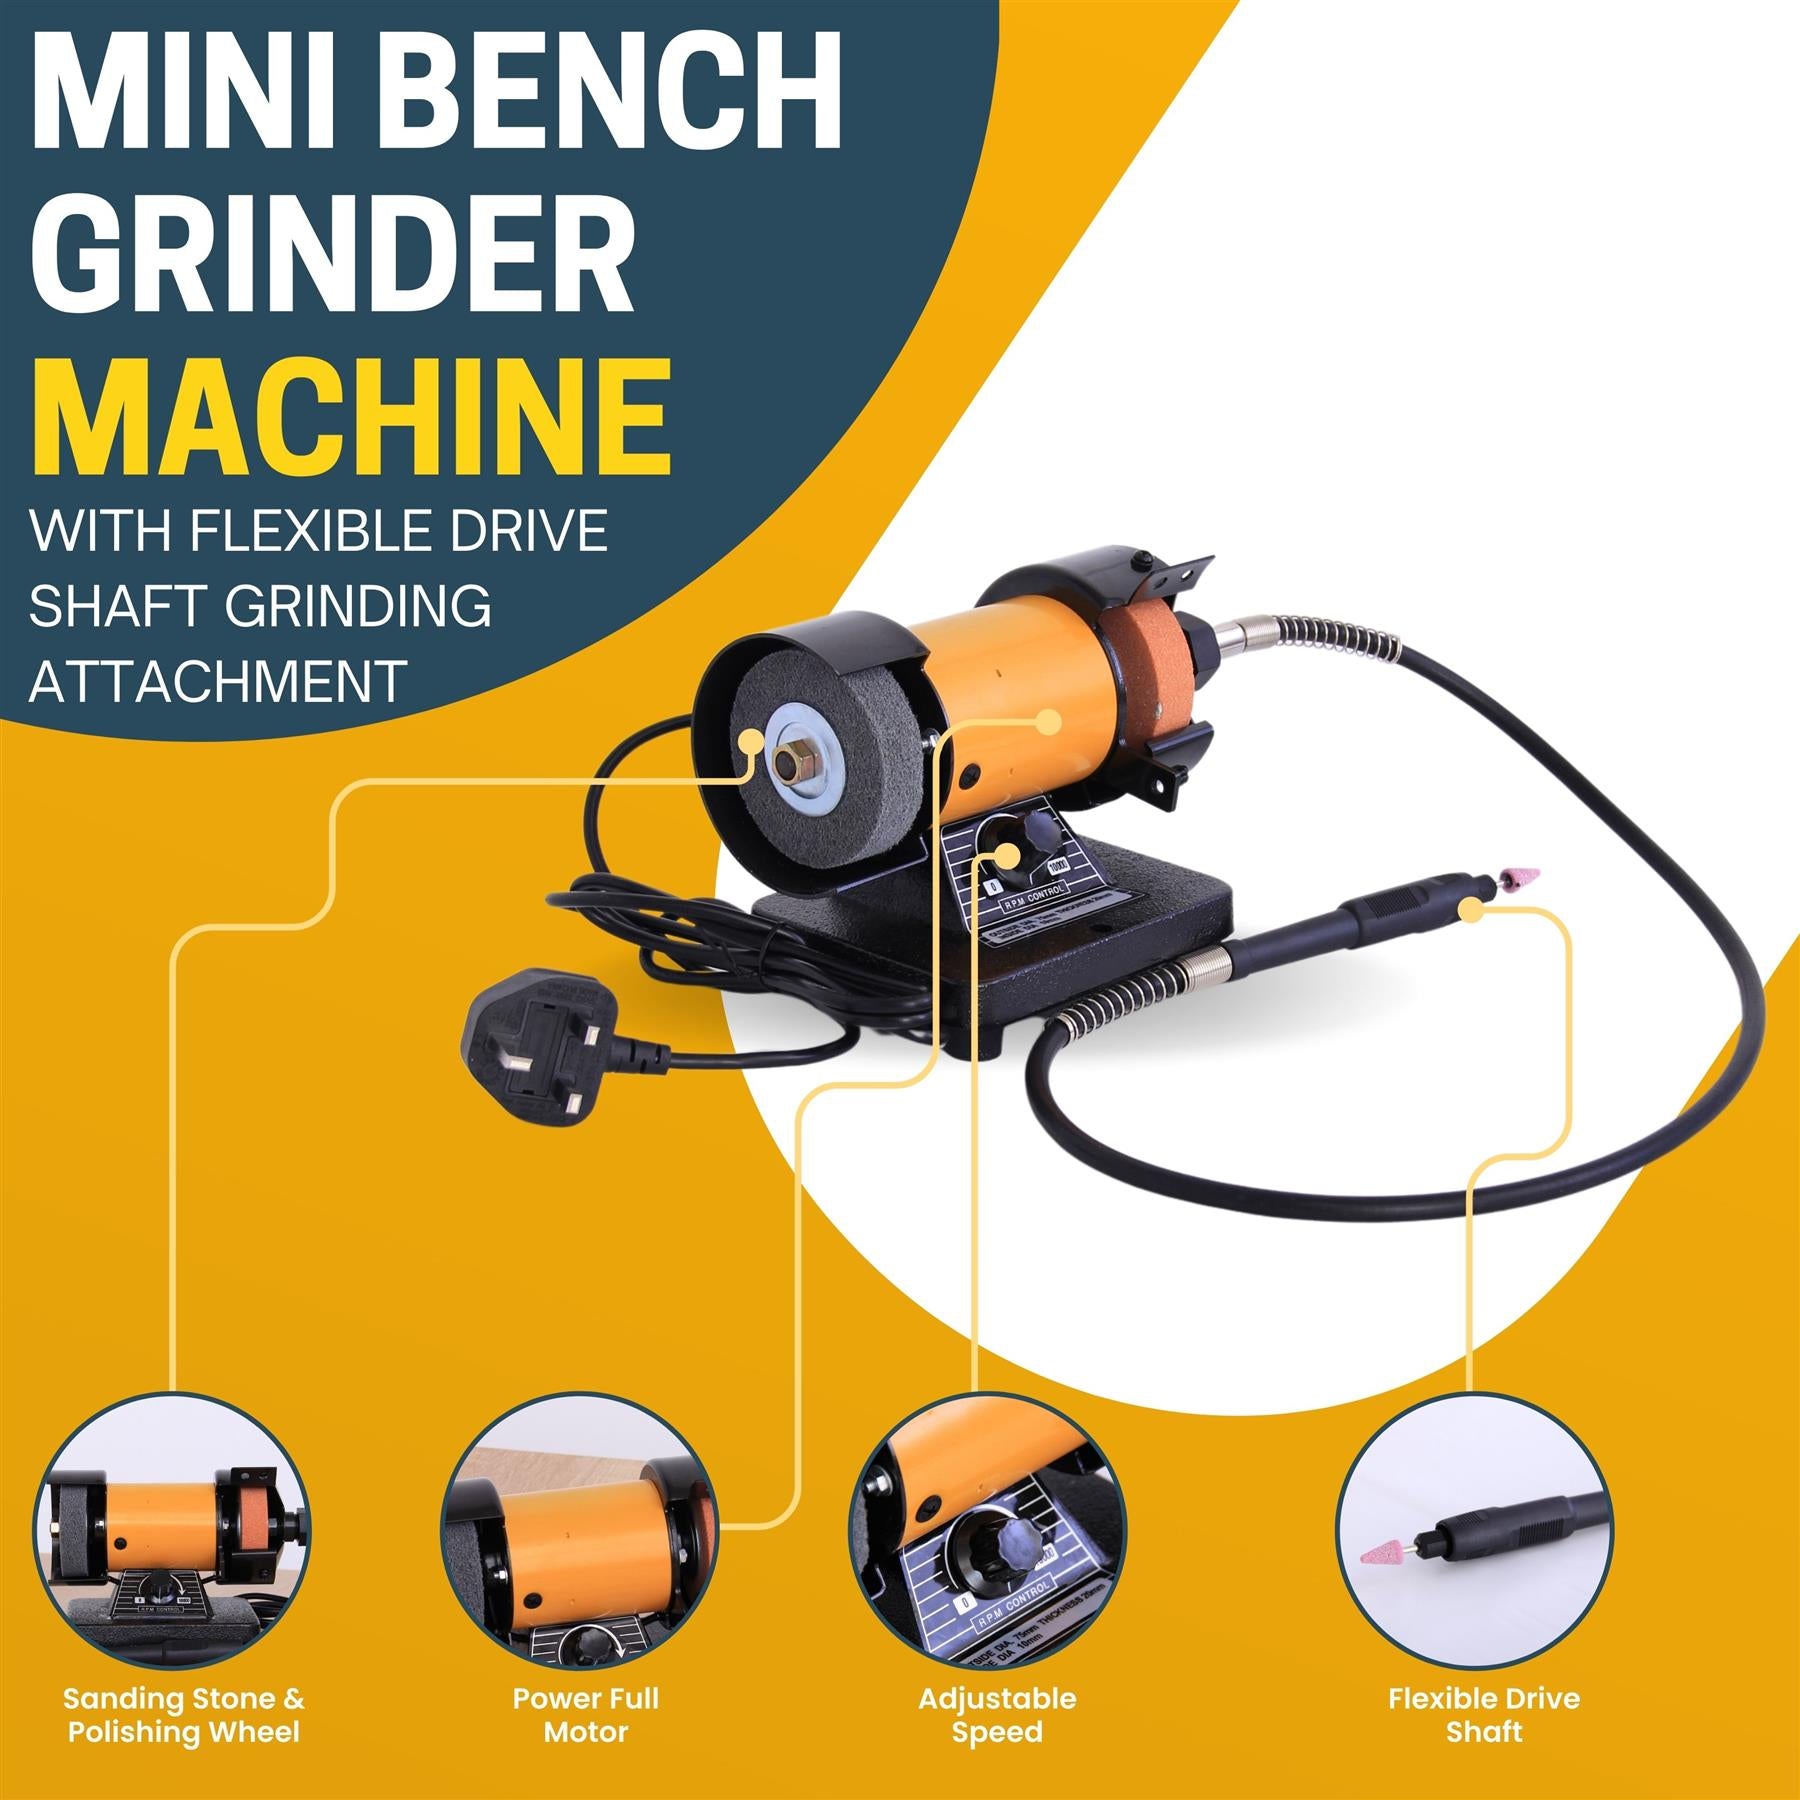 Mini Bench Grinder | Precise Grinding Attachment with Flexible Drive Shaft